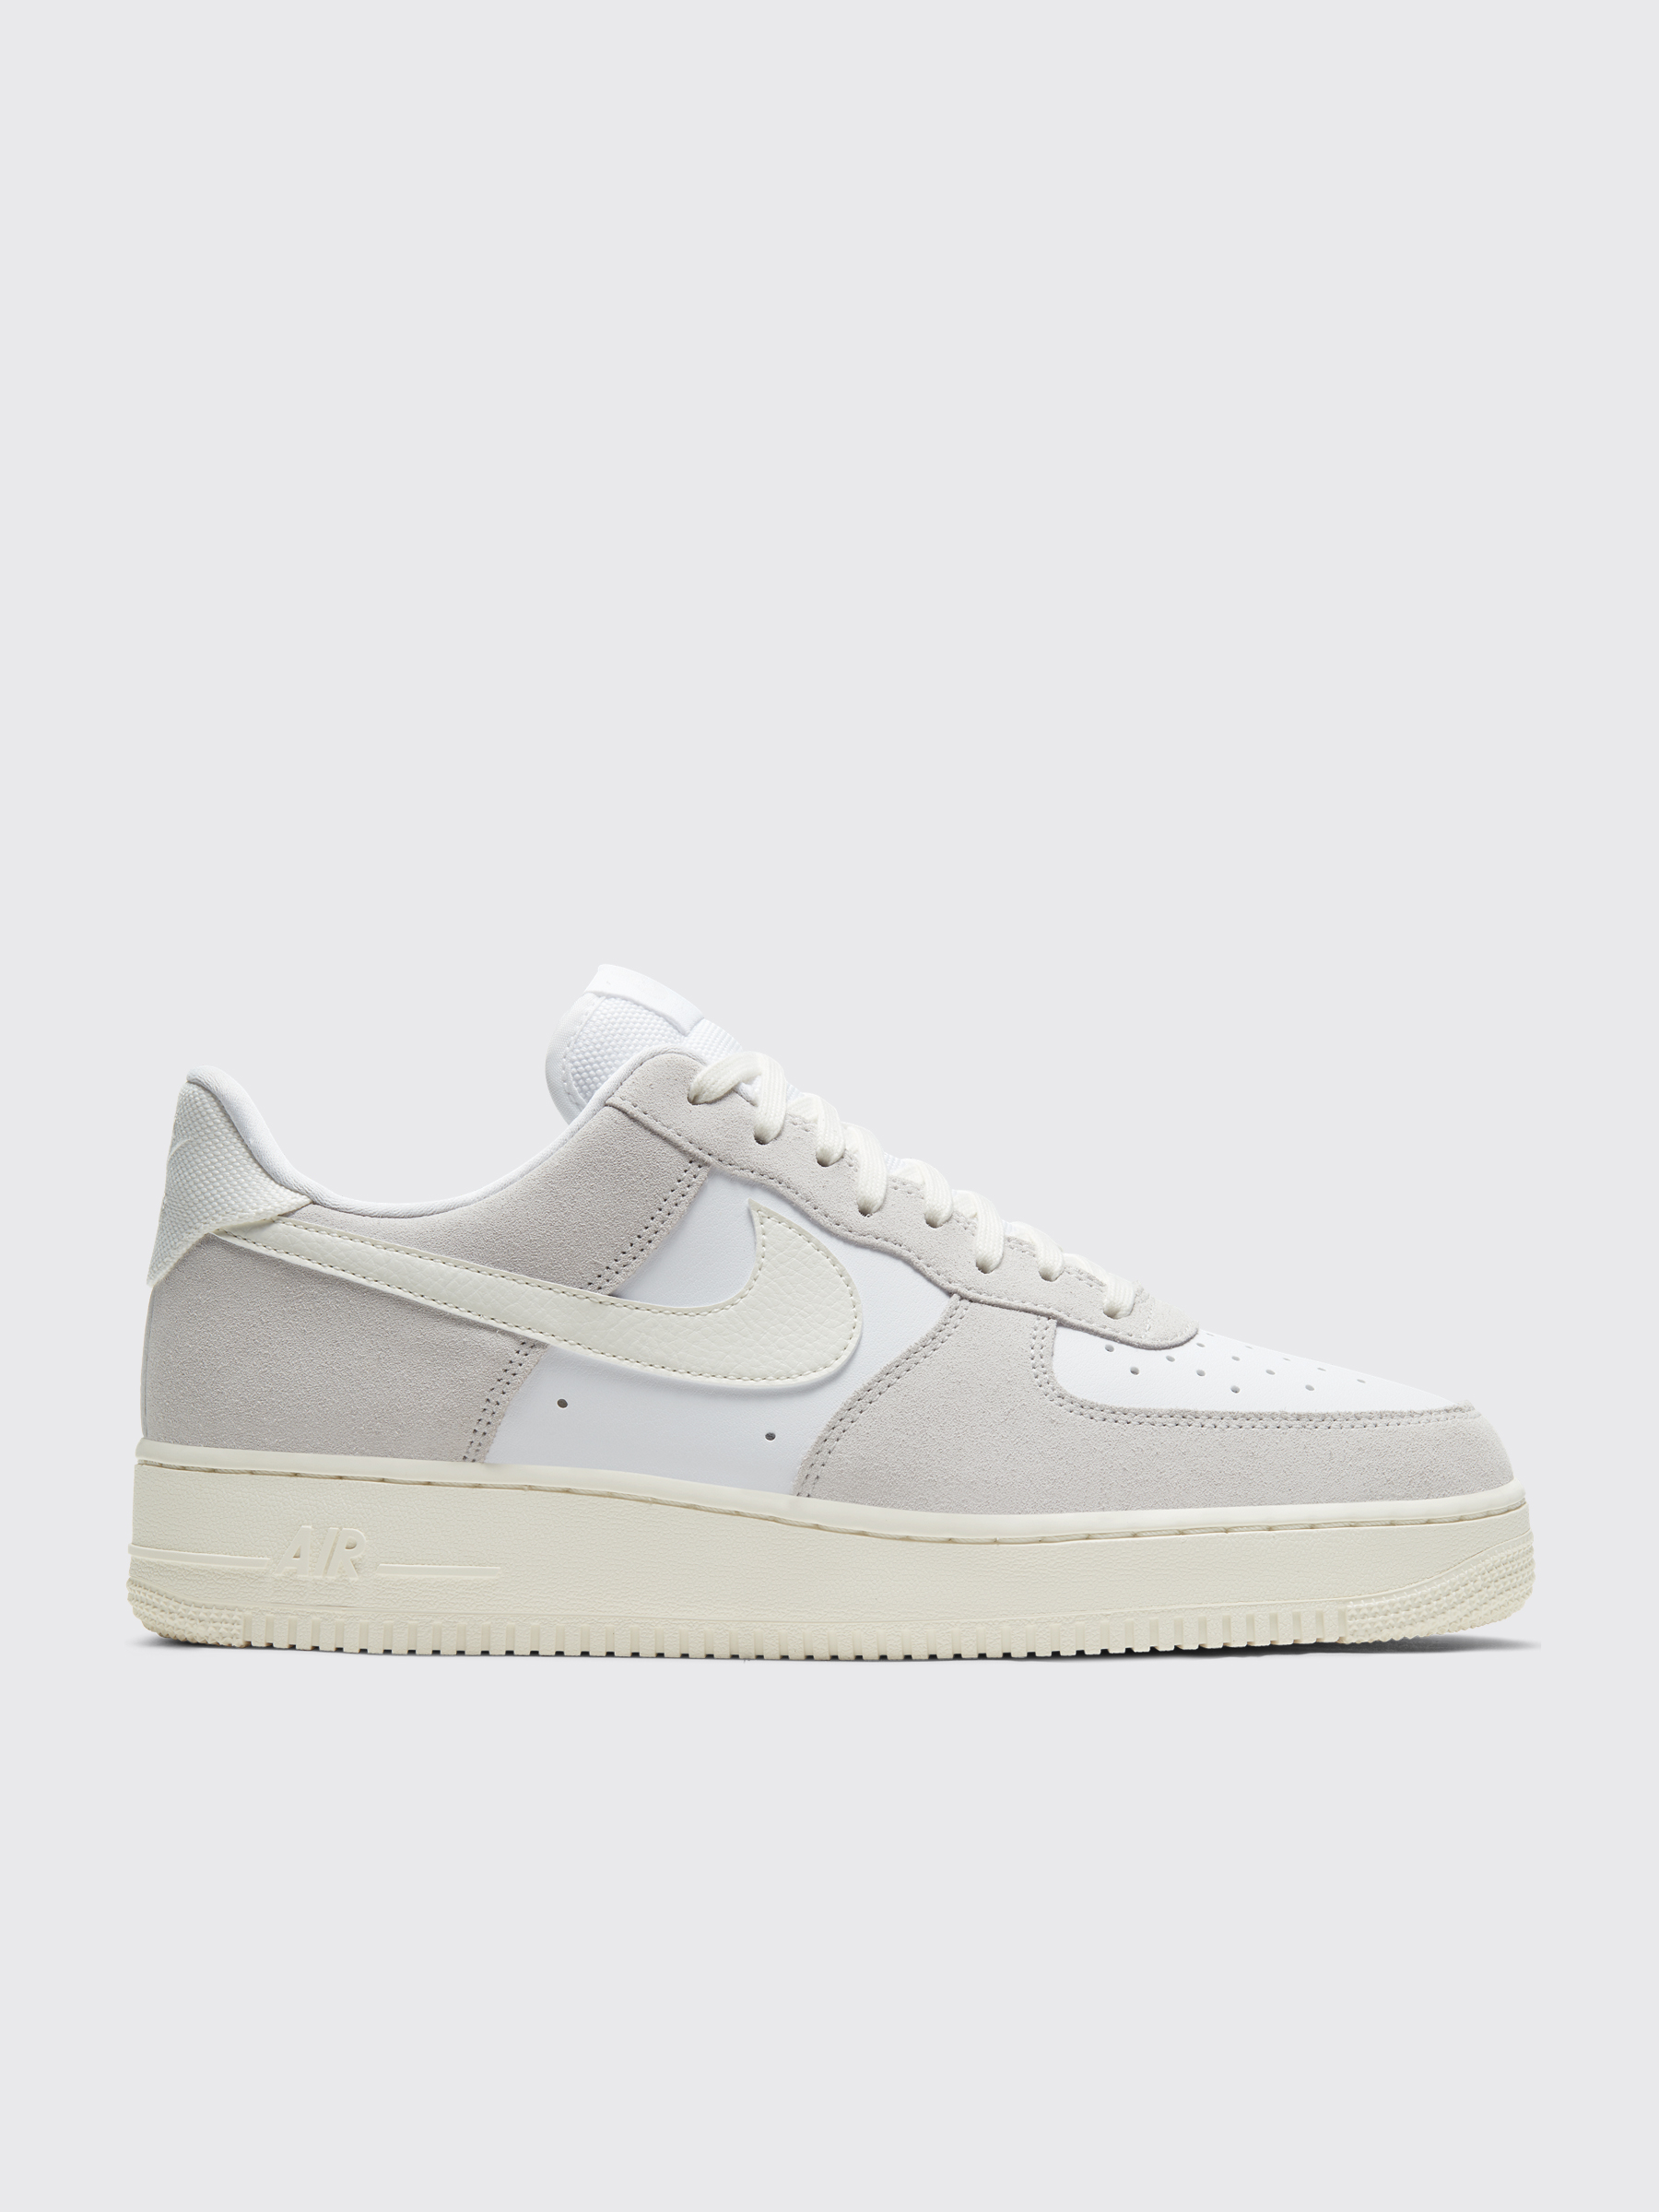 nike air force 1 leather sail